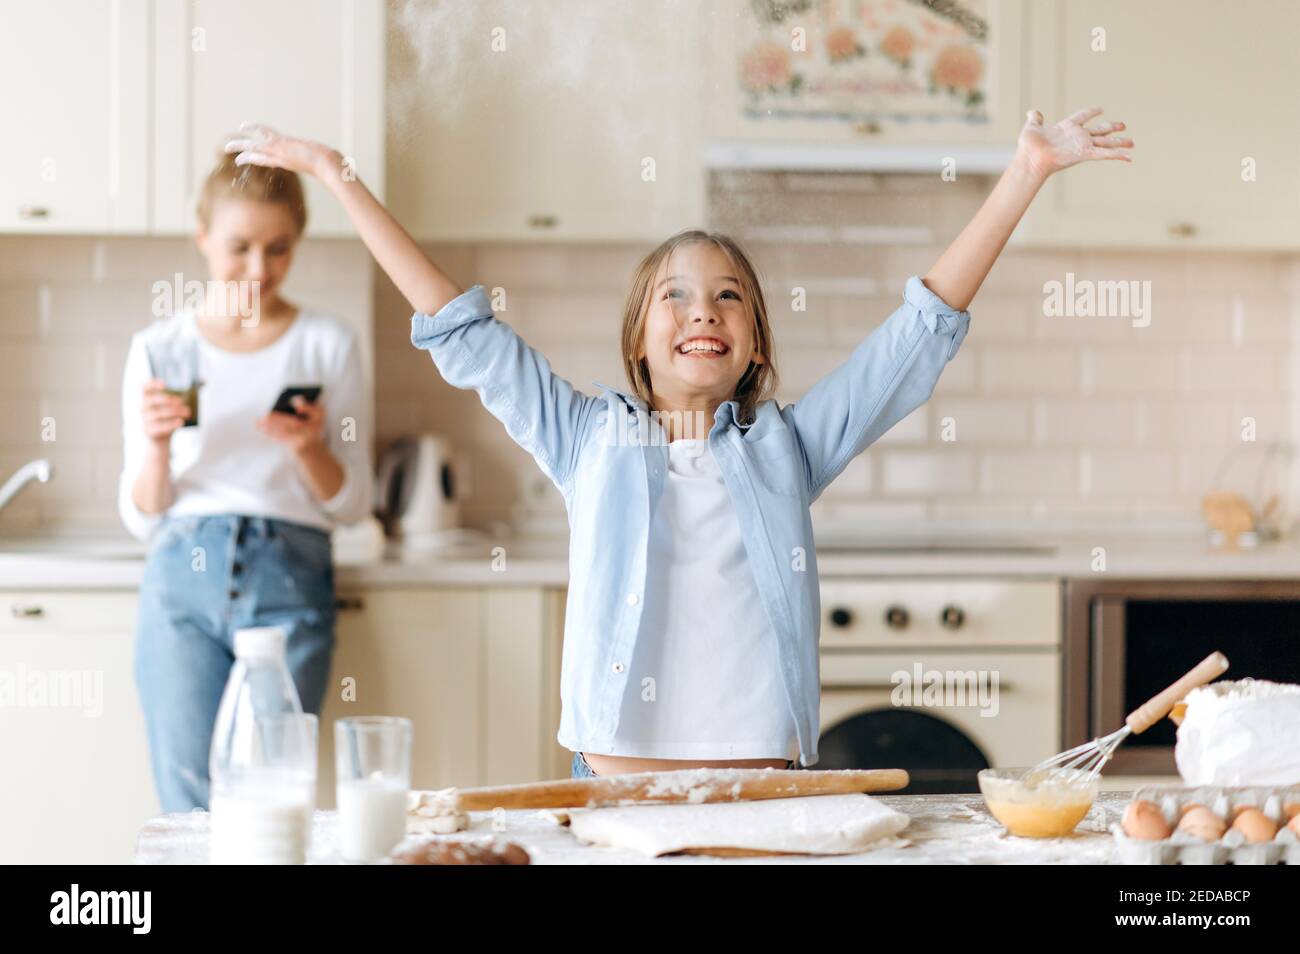 Little cook. A cute caucasian little girl learns to cook a pie, indulges in flour, smiling, mom stands on the background using the phone Stock Photo